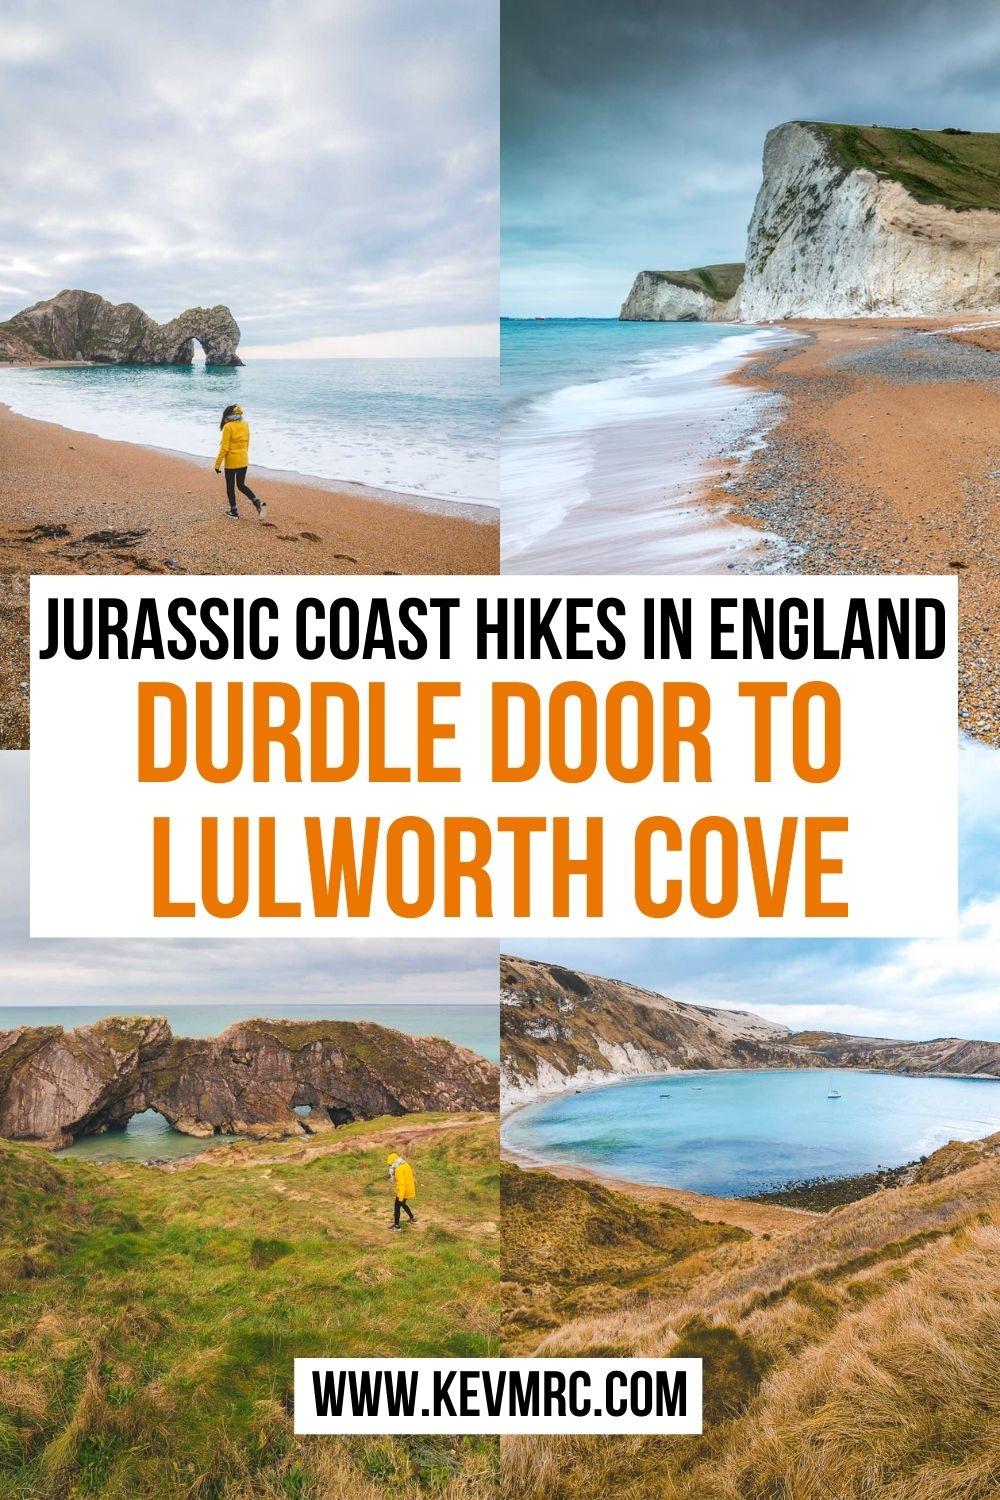 Durdle Door to Lulworth Cove - An Easy Yet Beautiful Hike. lulworth cove dorset | lulworth cove walks | dorset england places to visit | things to do in dorset england | durdle door dorset | durdle door travel | durdle door england | jurassic coast dorset | jurassic coast hike | jurassic coast walk